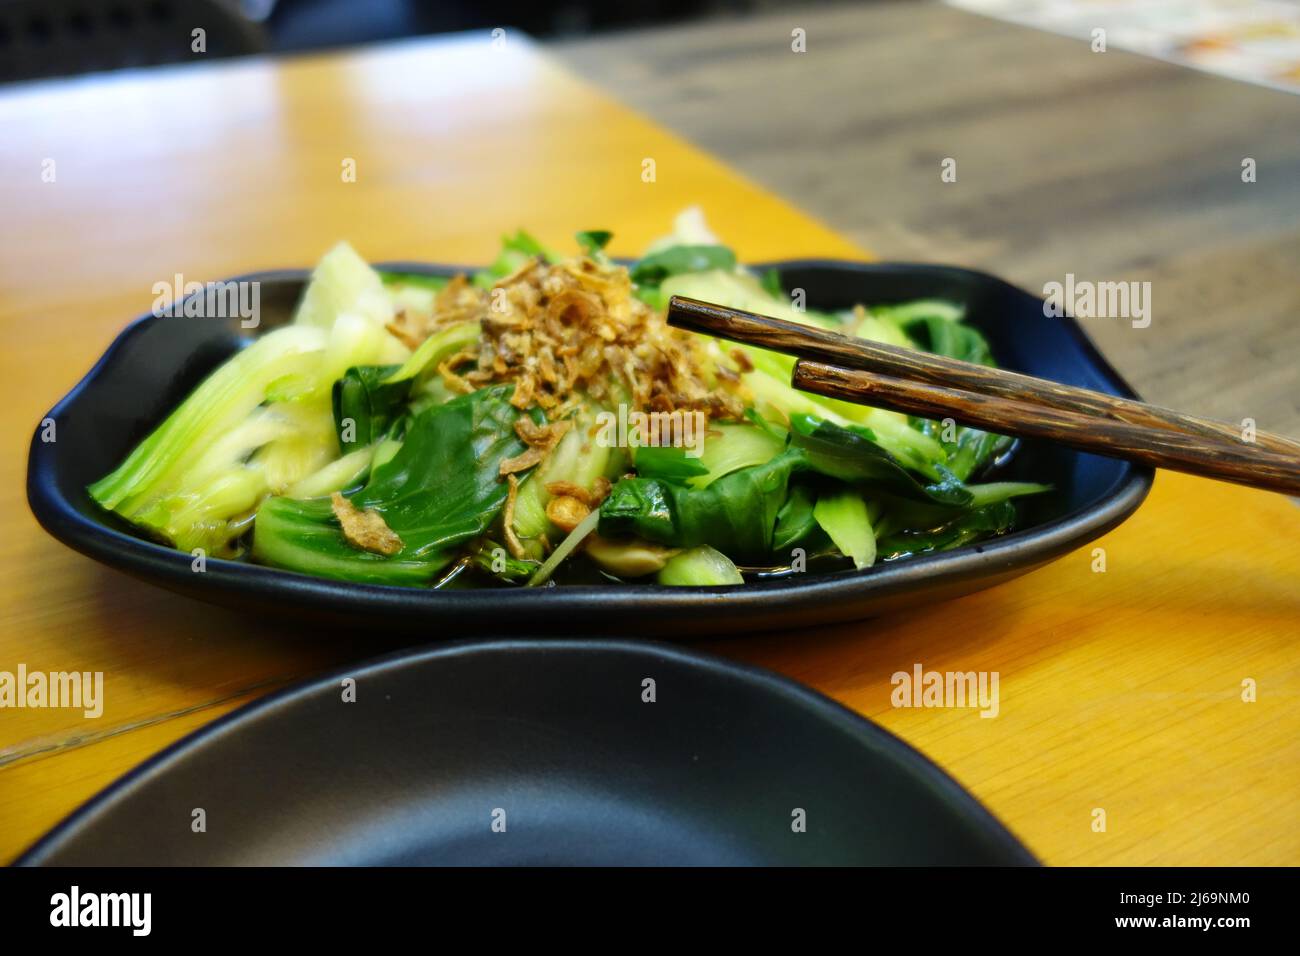 green vegetable on a black plate with wooden chopsticks as a close up Stock Photo